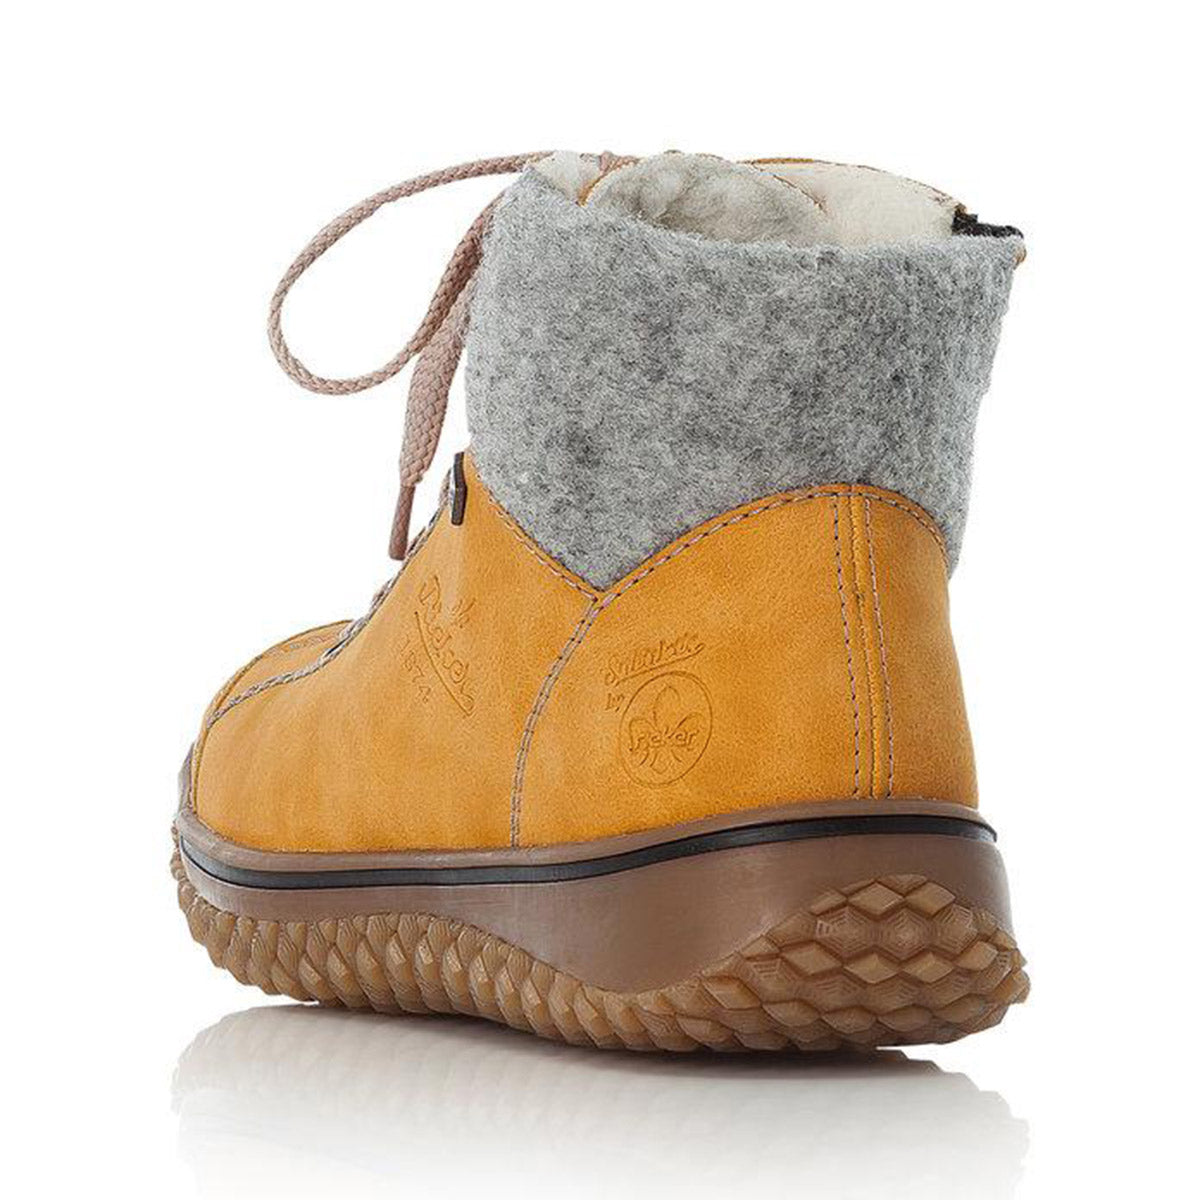 Side view of a winter boot with a tan leather upper and grey felted collar, featuring a RiekerTex membrane, chunky sole, and lace-up back.